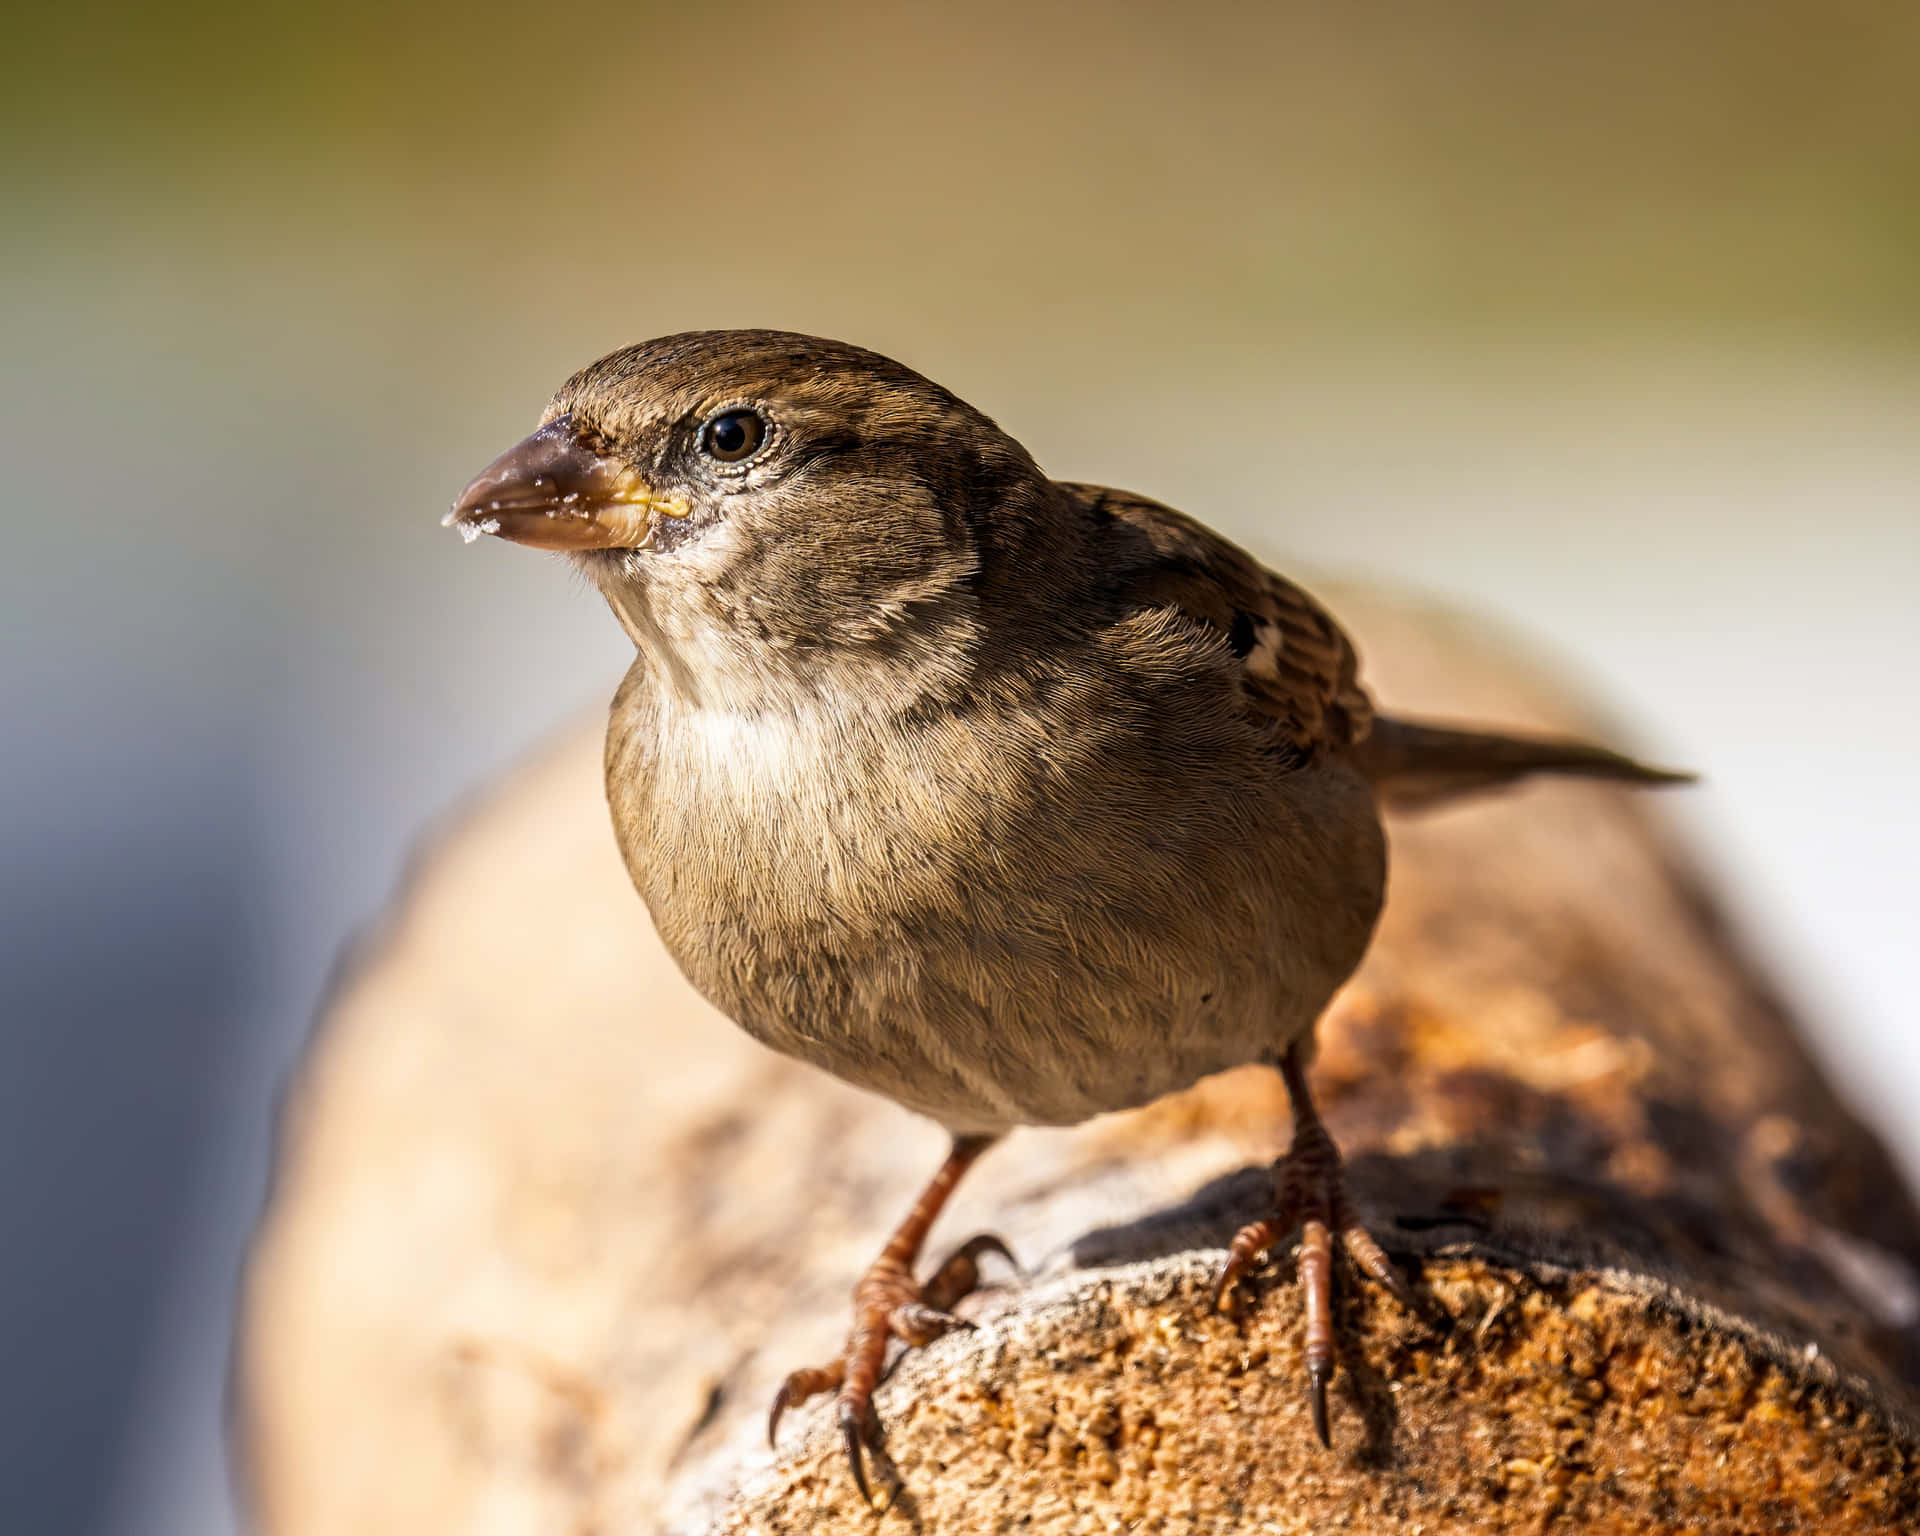 A friendly sparrow perched atop a tree branch